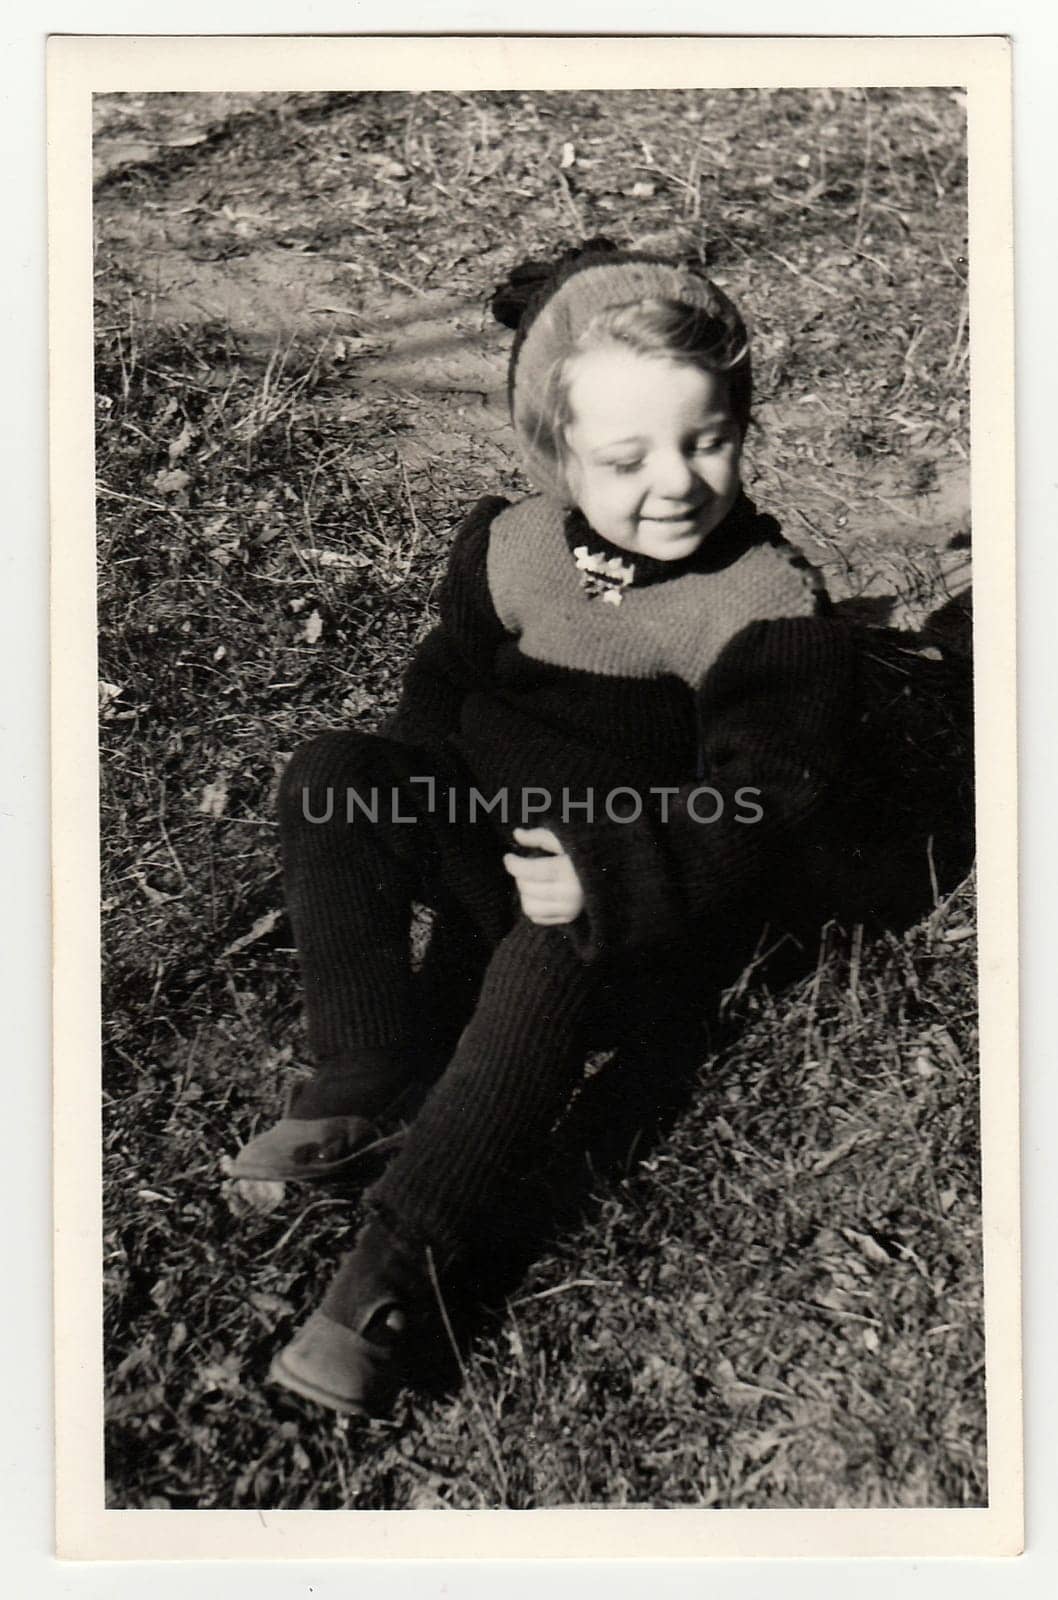 Vintage photo shows a small girl sits on grass, circa 1941 by roman_nerud